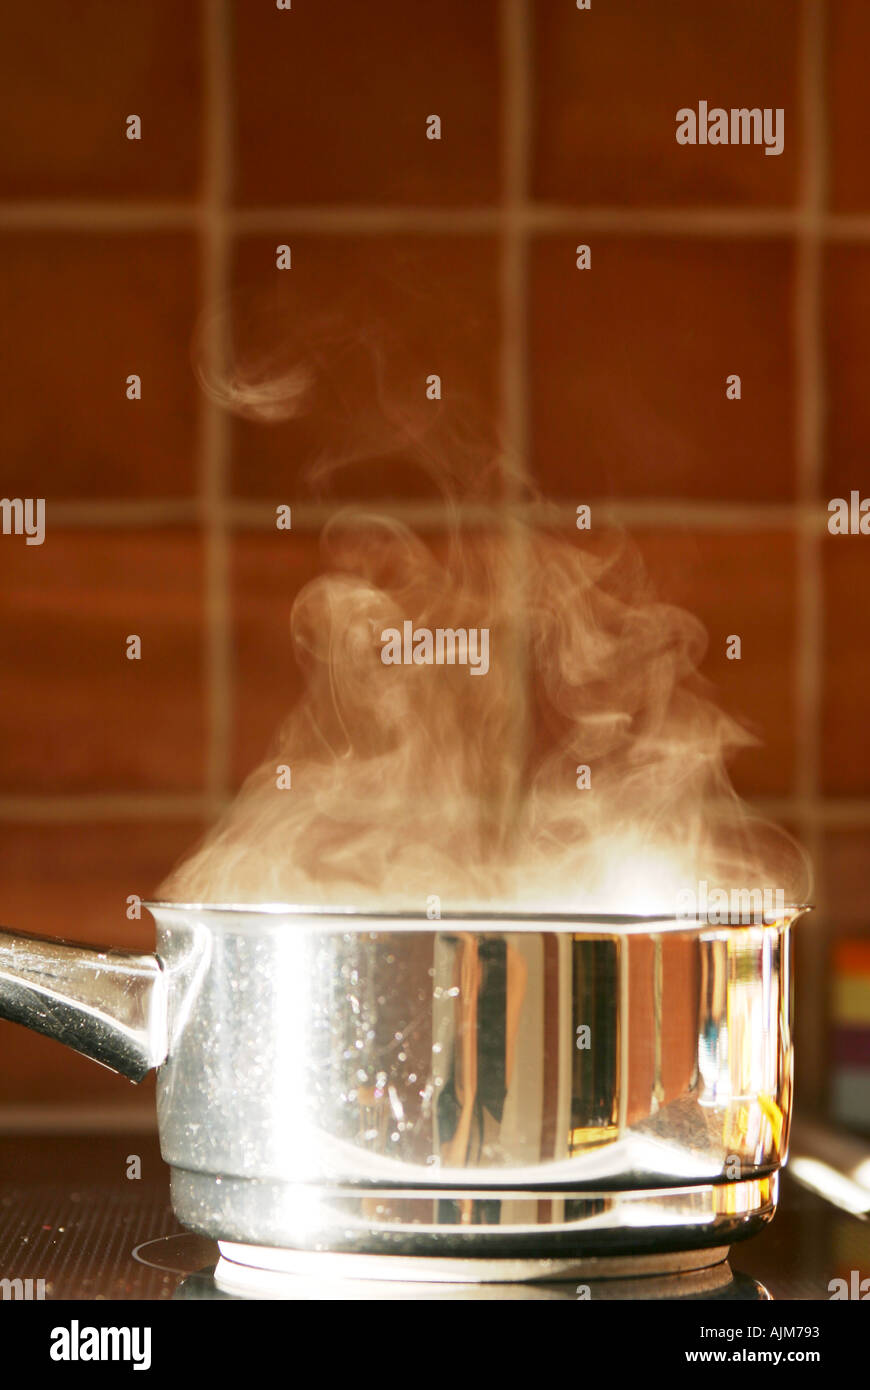 Boiling water Stock Photo